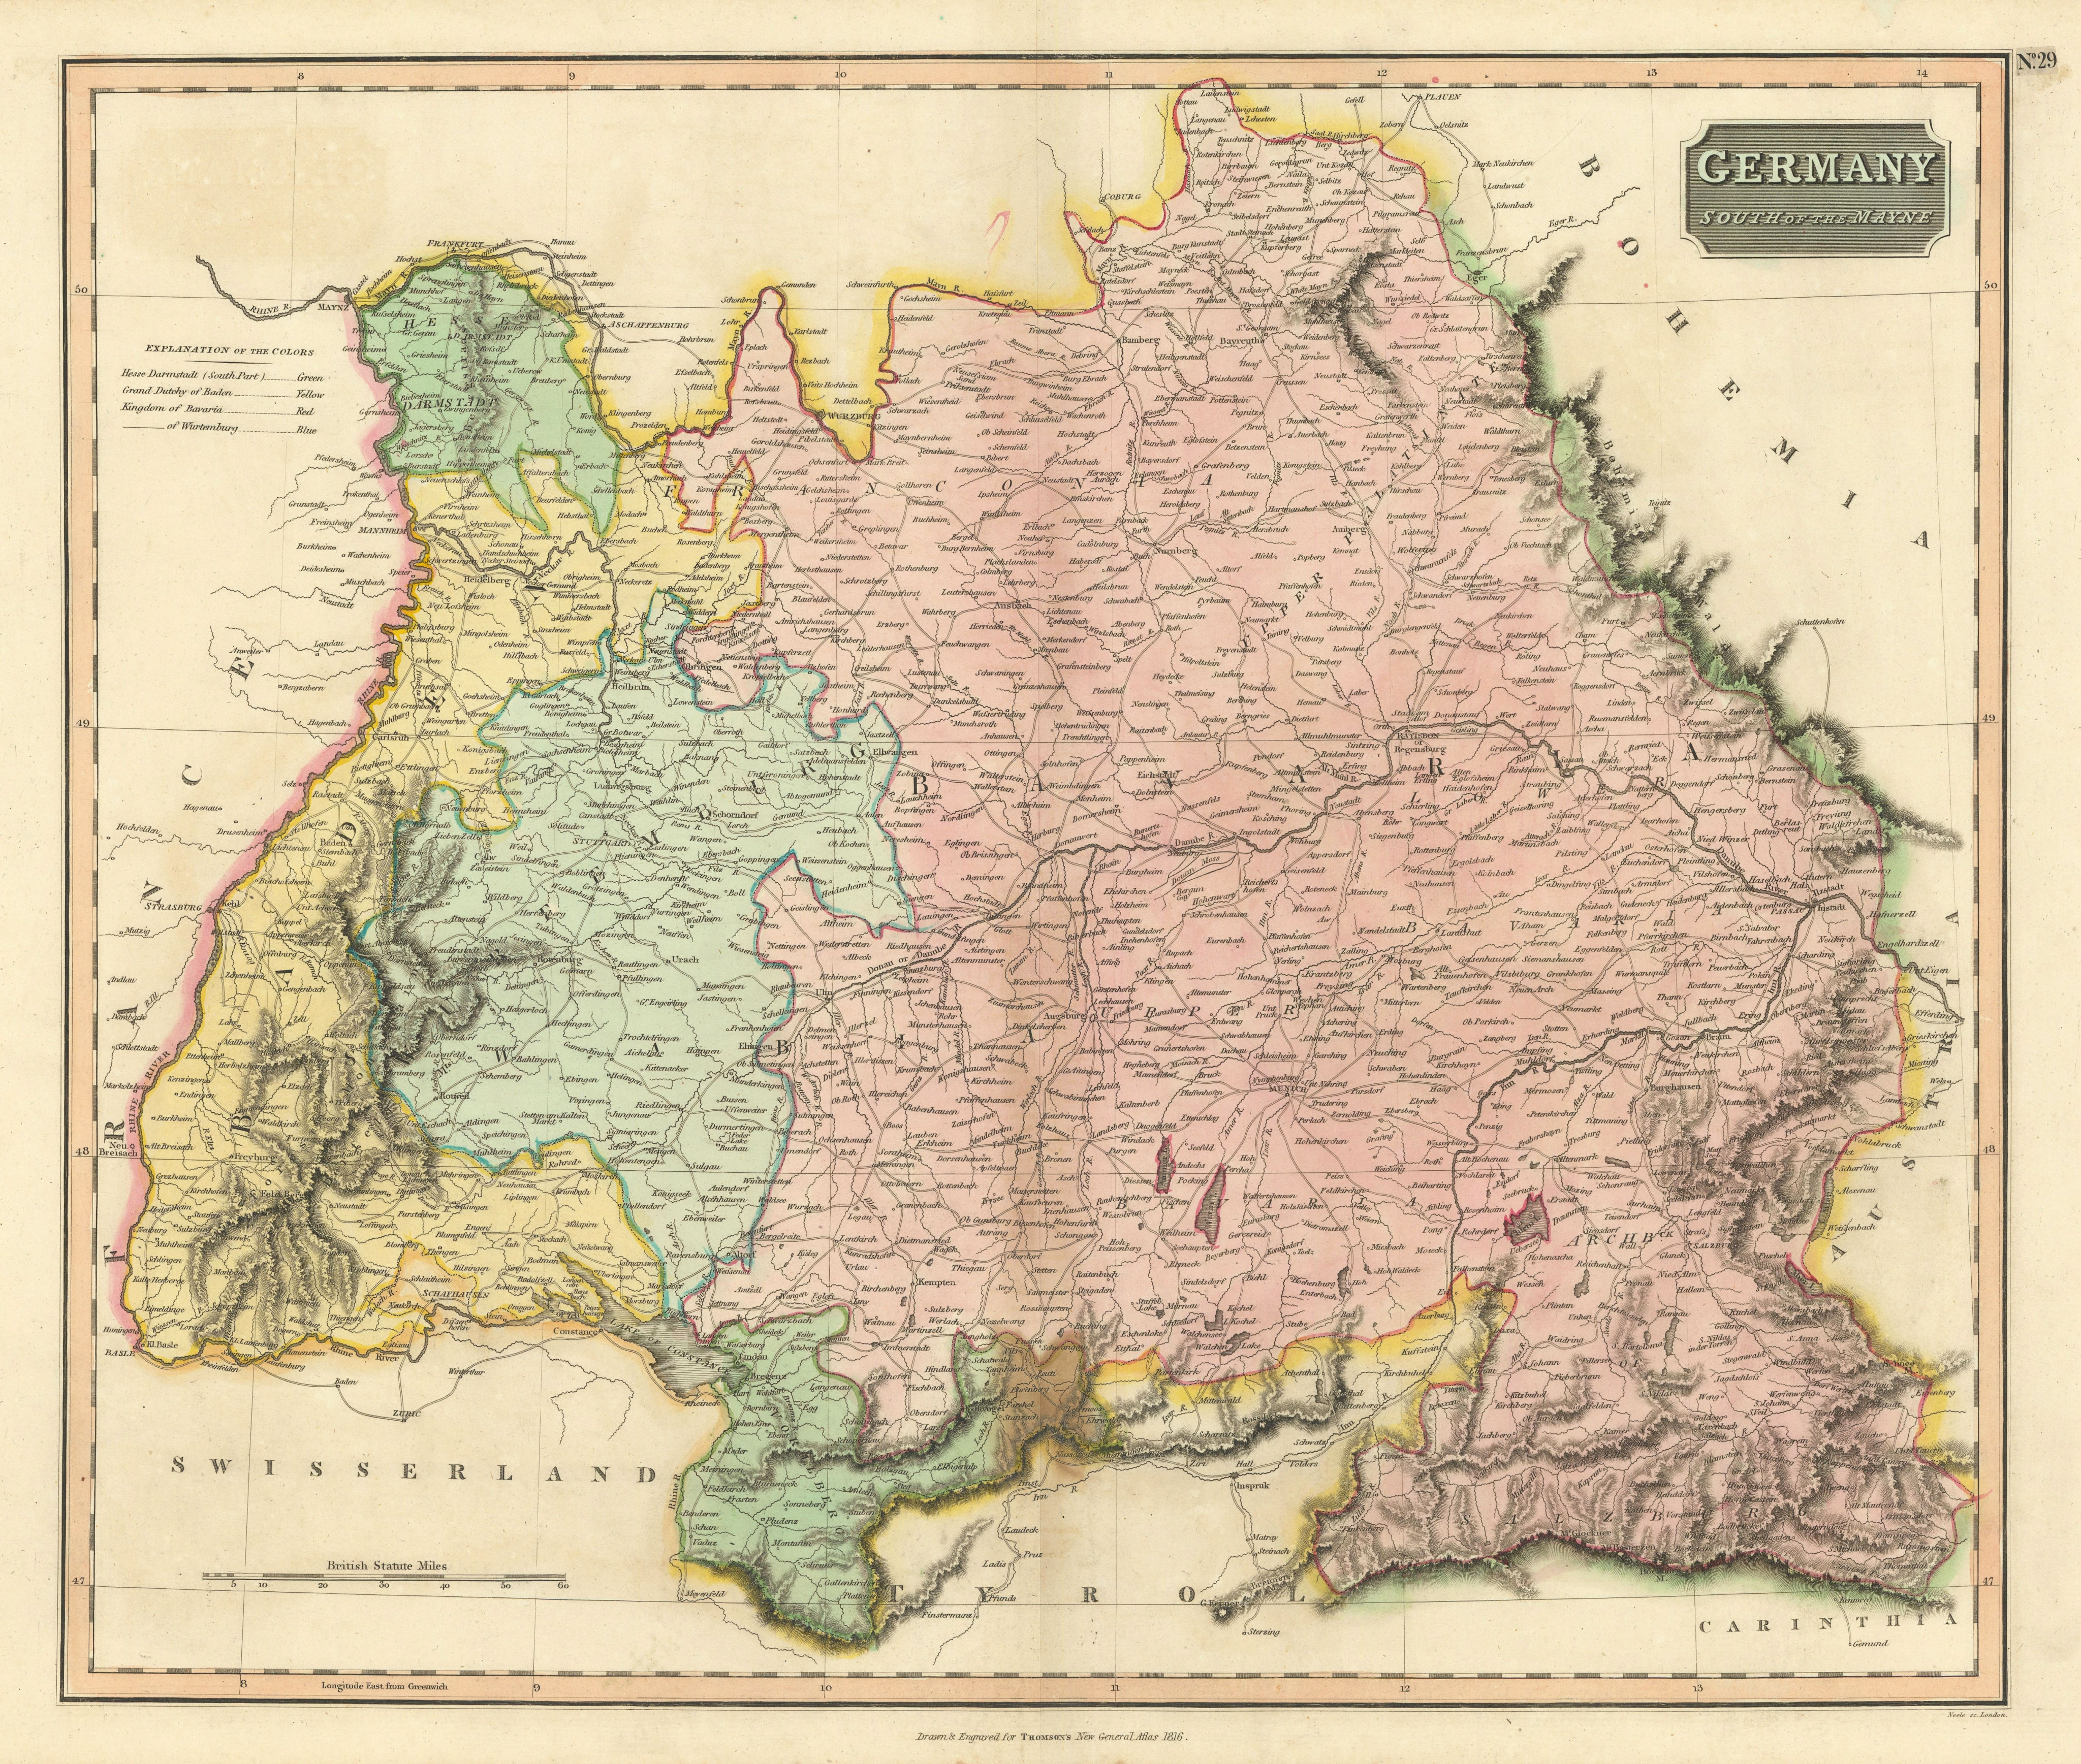 Associate Product "Germany, south of the Mayne" (Main). Bavaria Baden Voralberg. THOMSON 1817 map